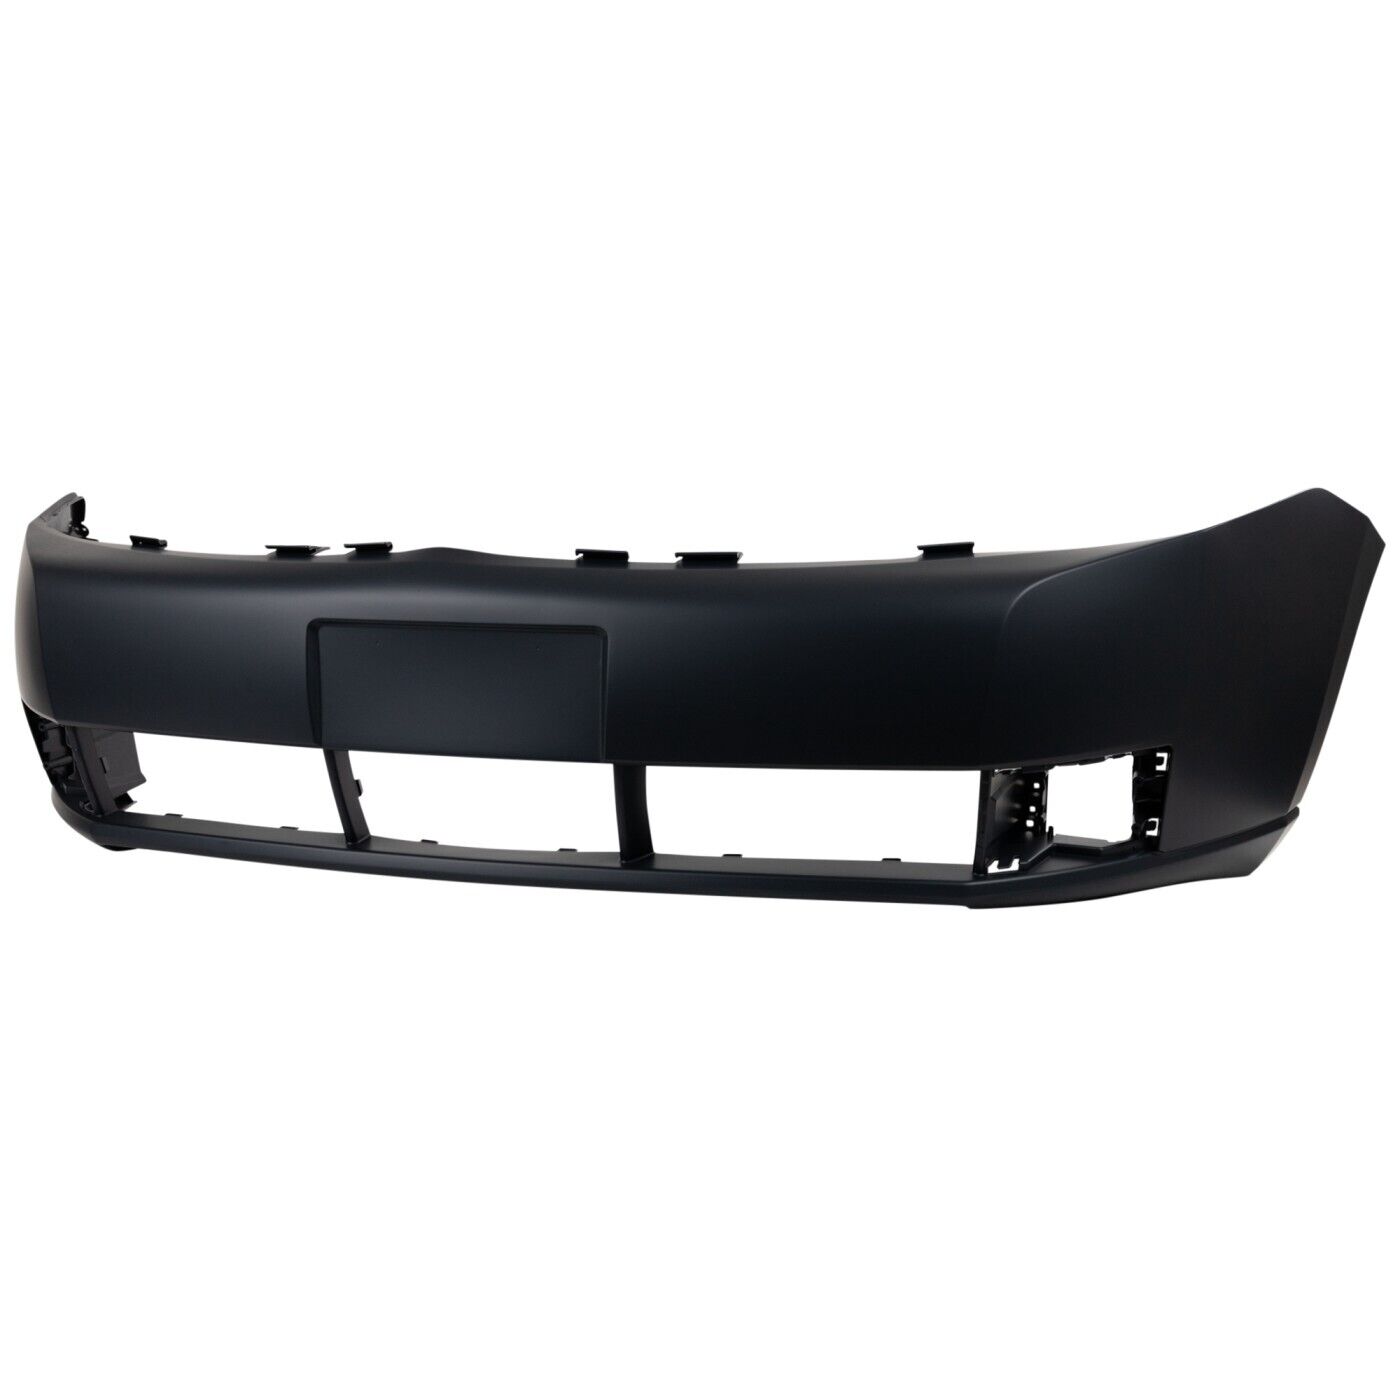 Front Bumper Cover For 2008-2011 Ford Focus w/ fog lamp holes Primed CAPA